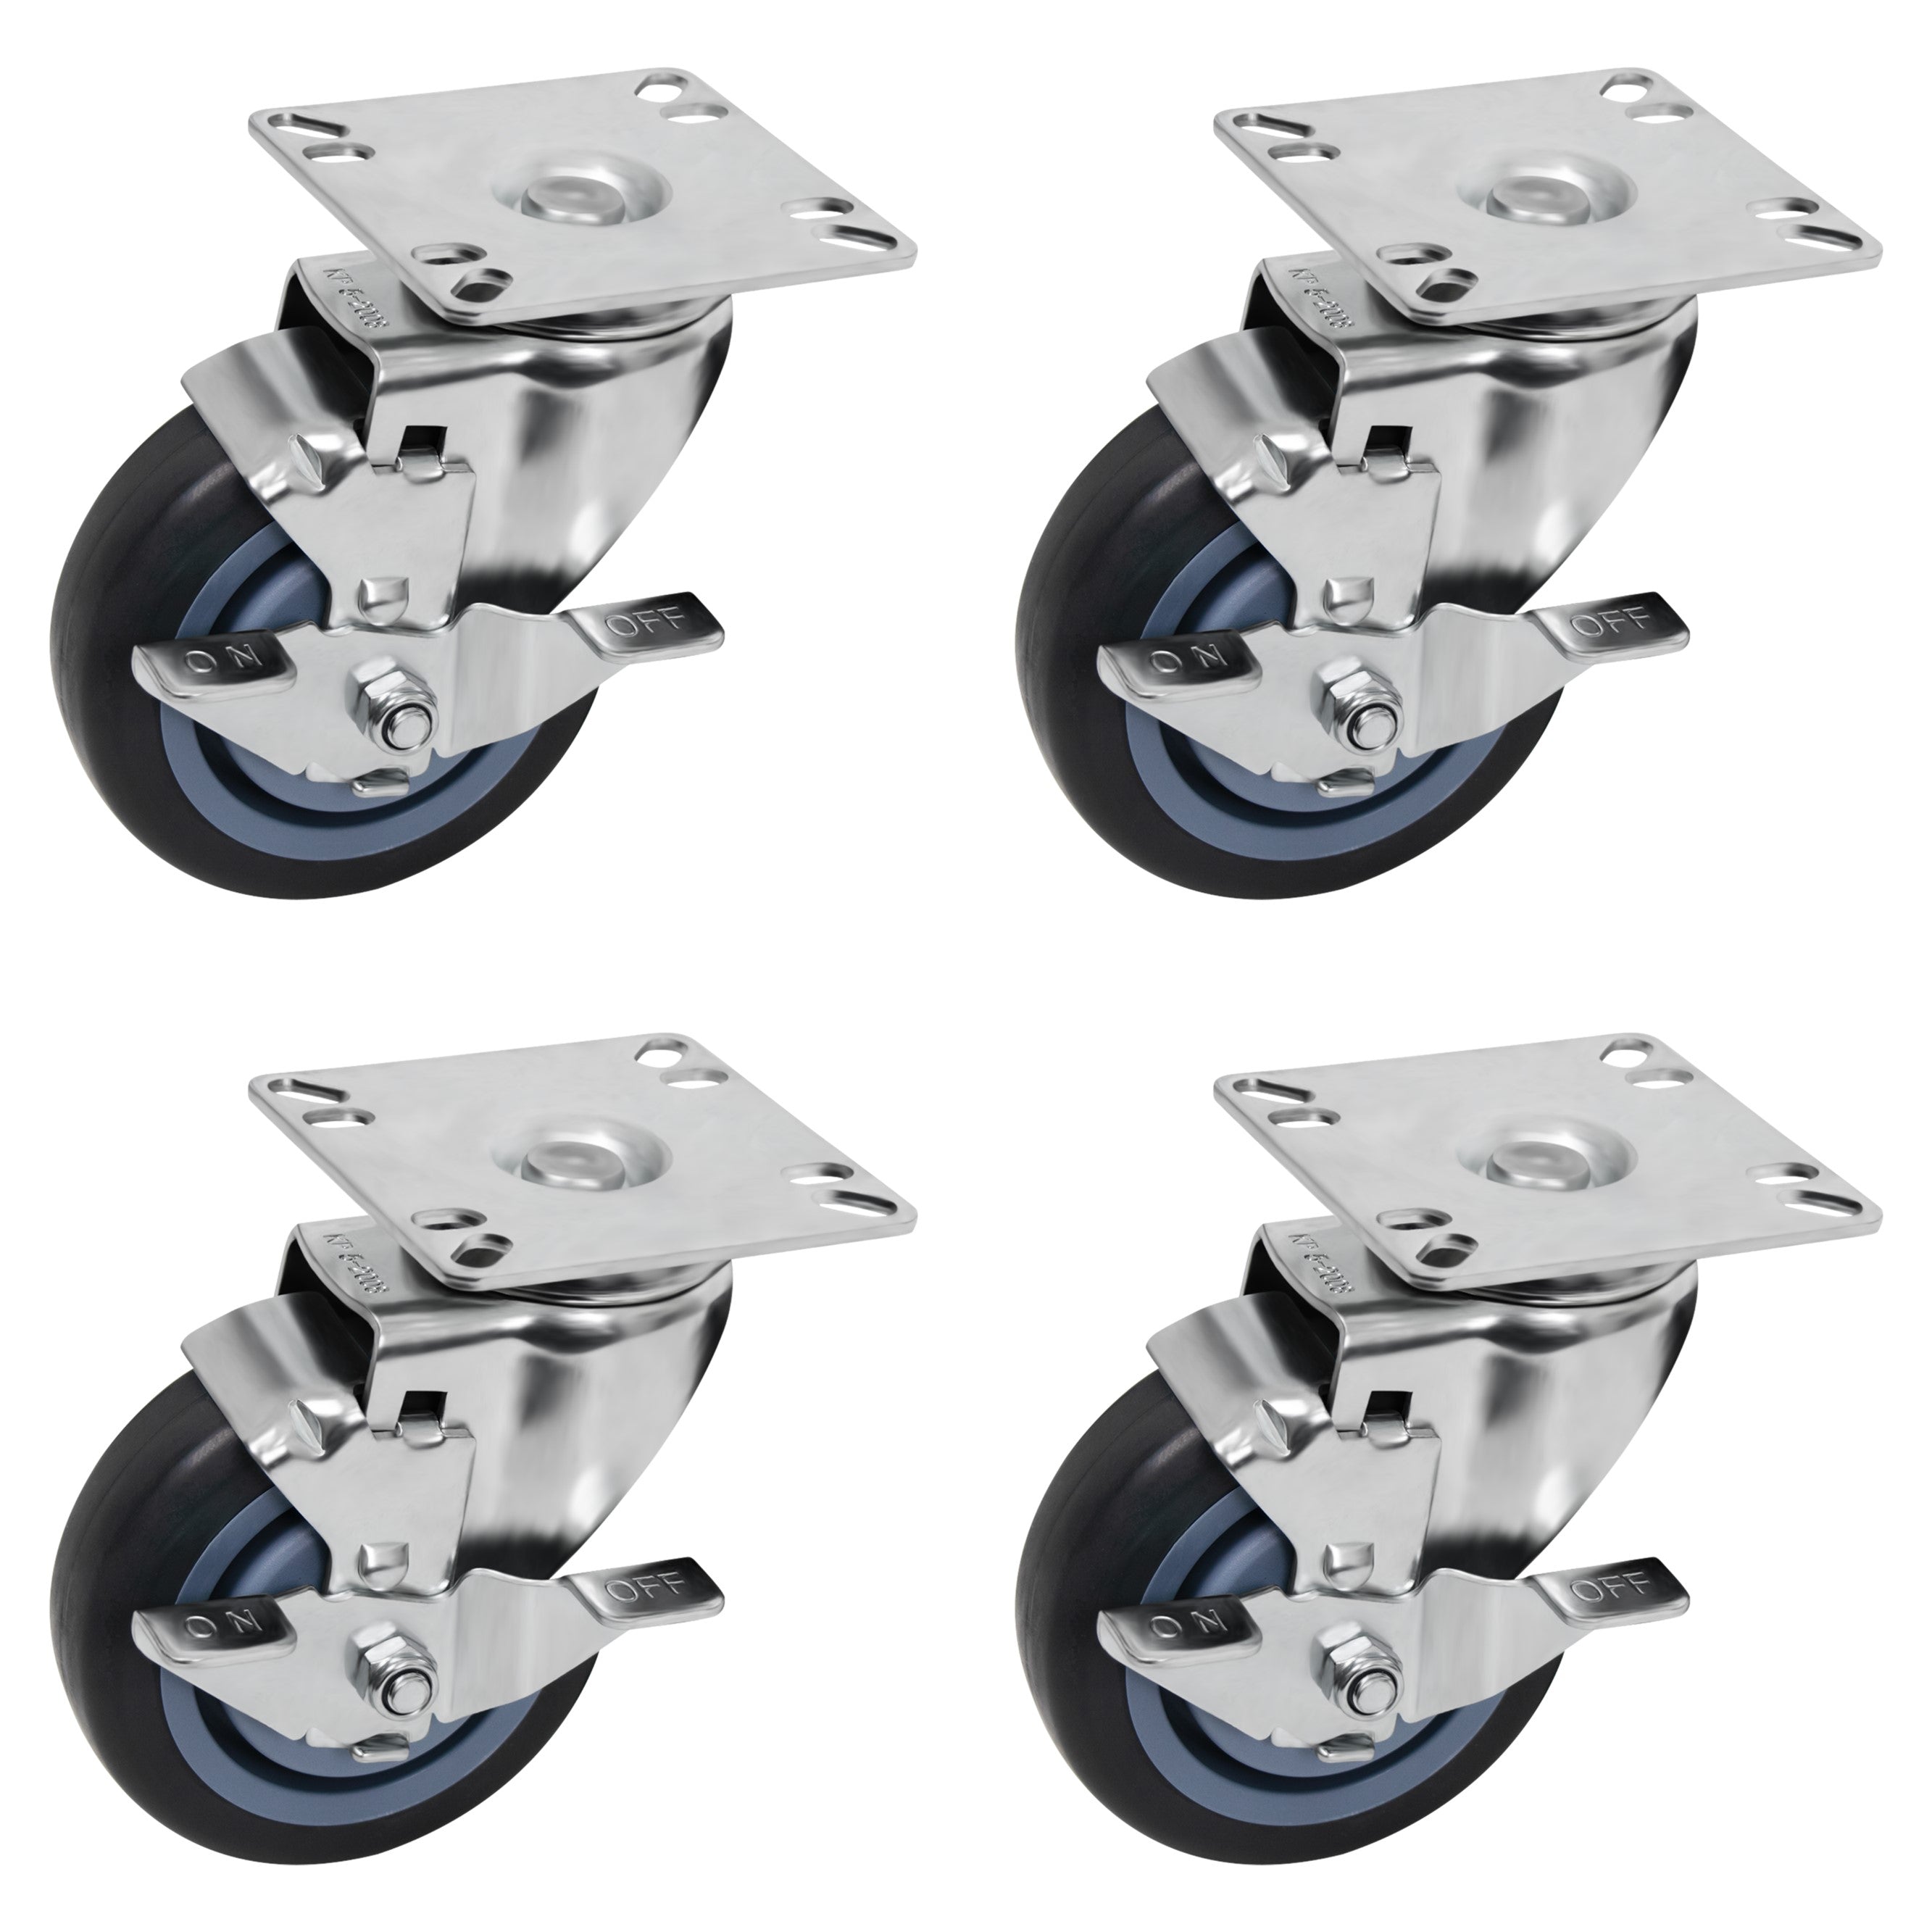 GSW 5" Low Temperature Casters - Plate Casters - Set of 4 Polyurethane Caster with 1320 Lbs Loading Capacity (Swivel with Brake) KP6114U